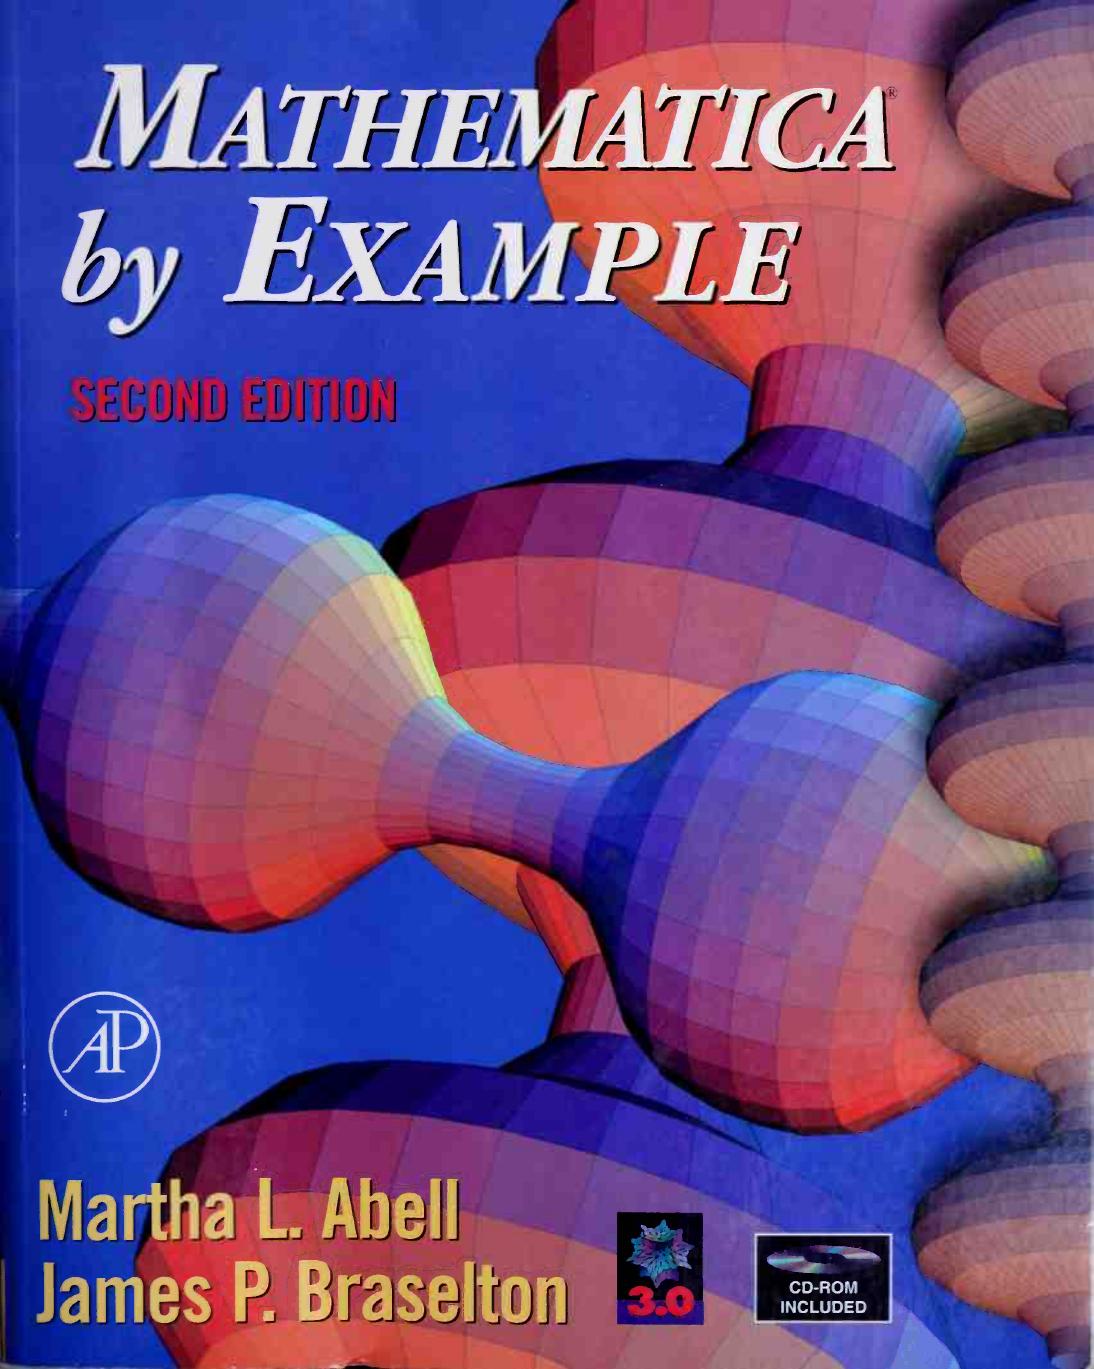 Mathematica® by Example